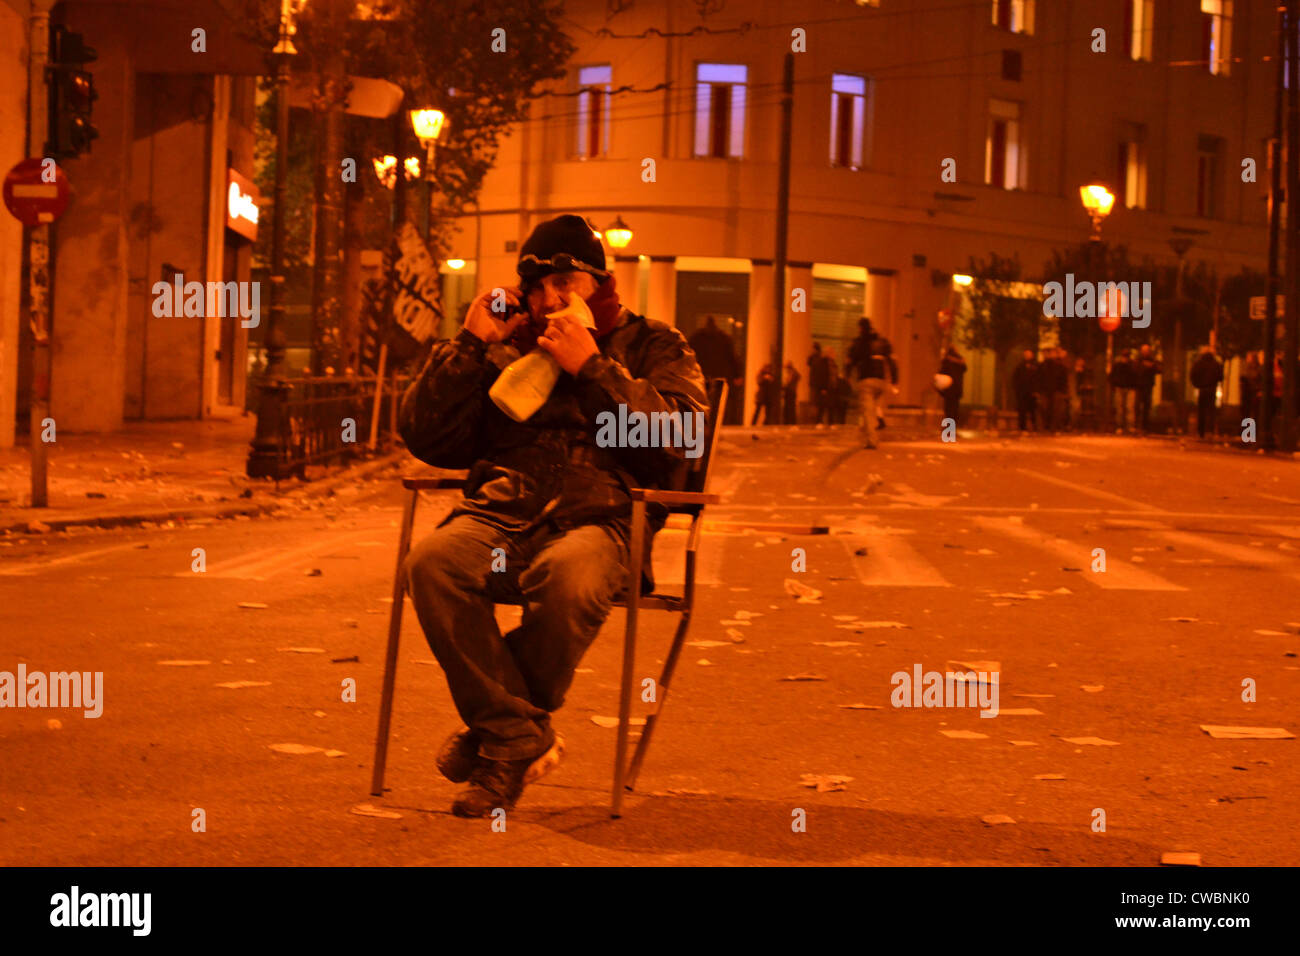 A man rests on a burnt chair in the middle of the street during a night of violence after a demonstration in Athens. Stock Photo